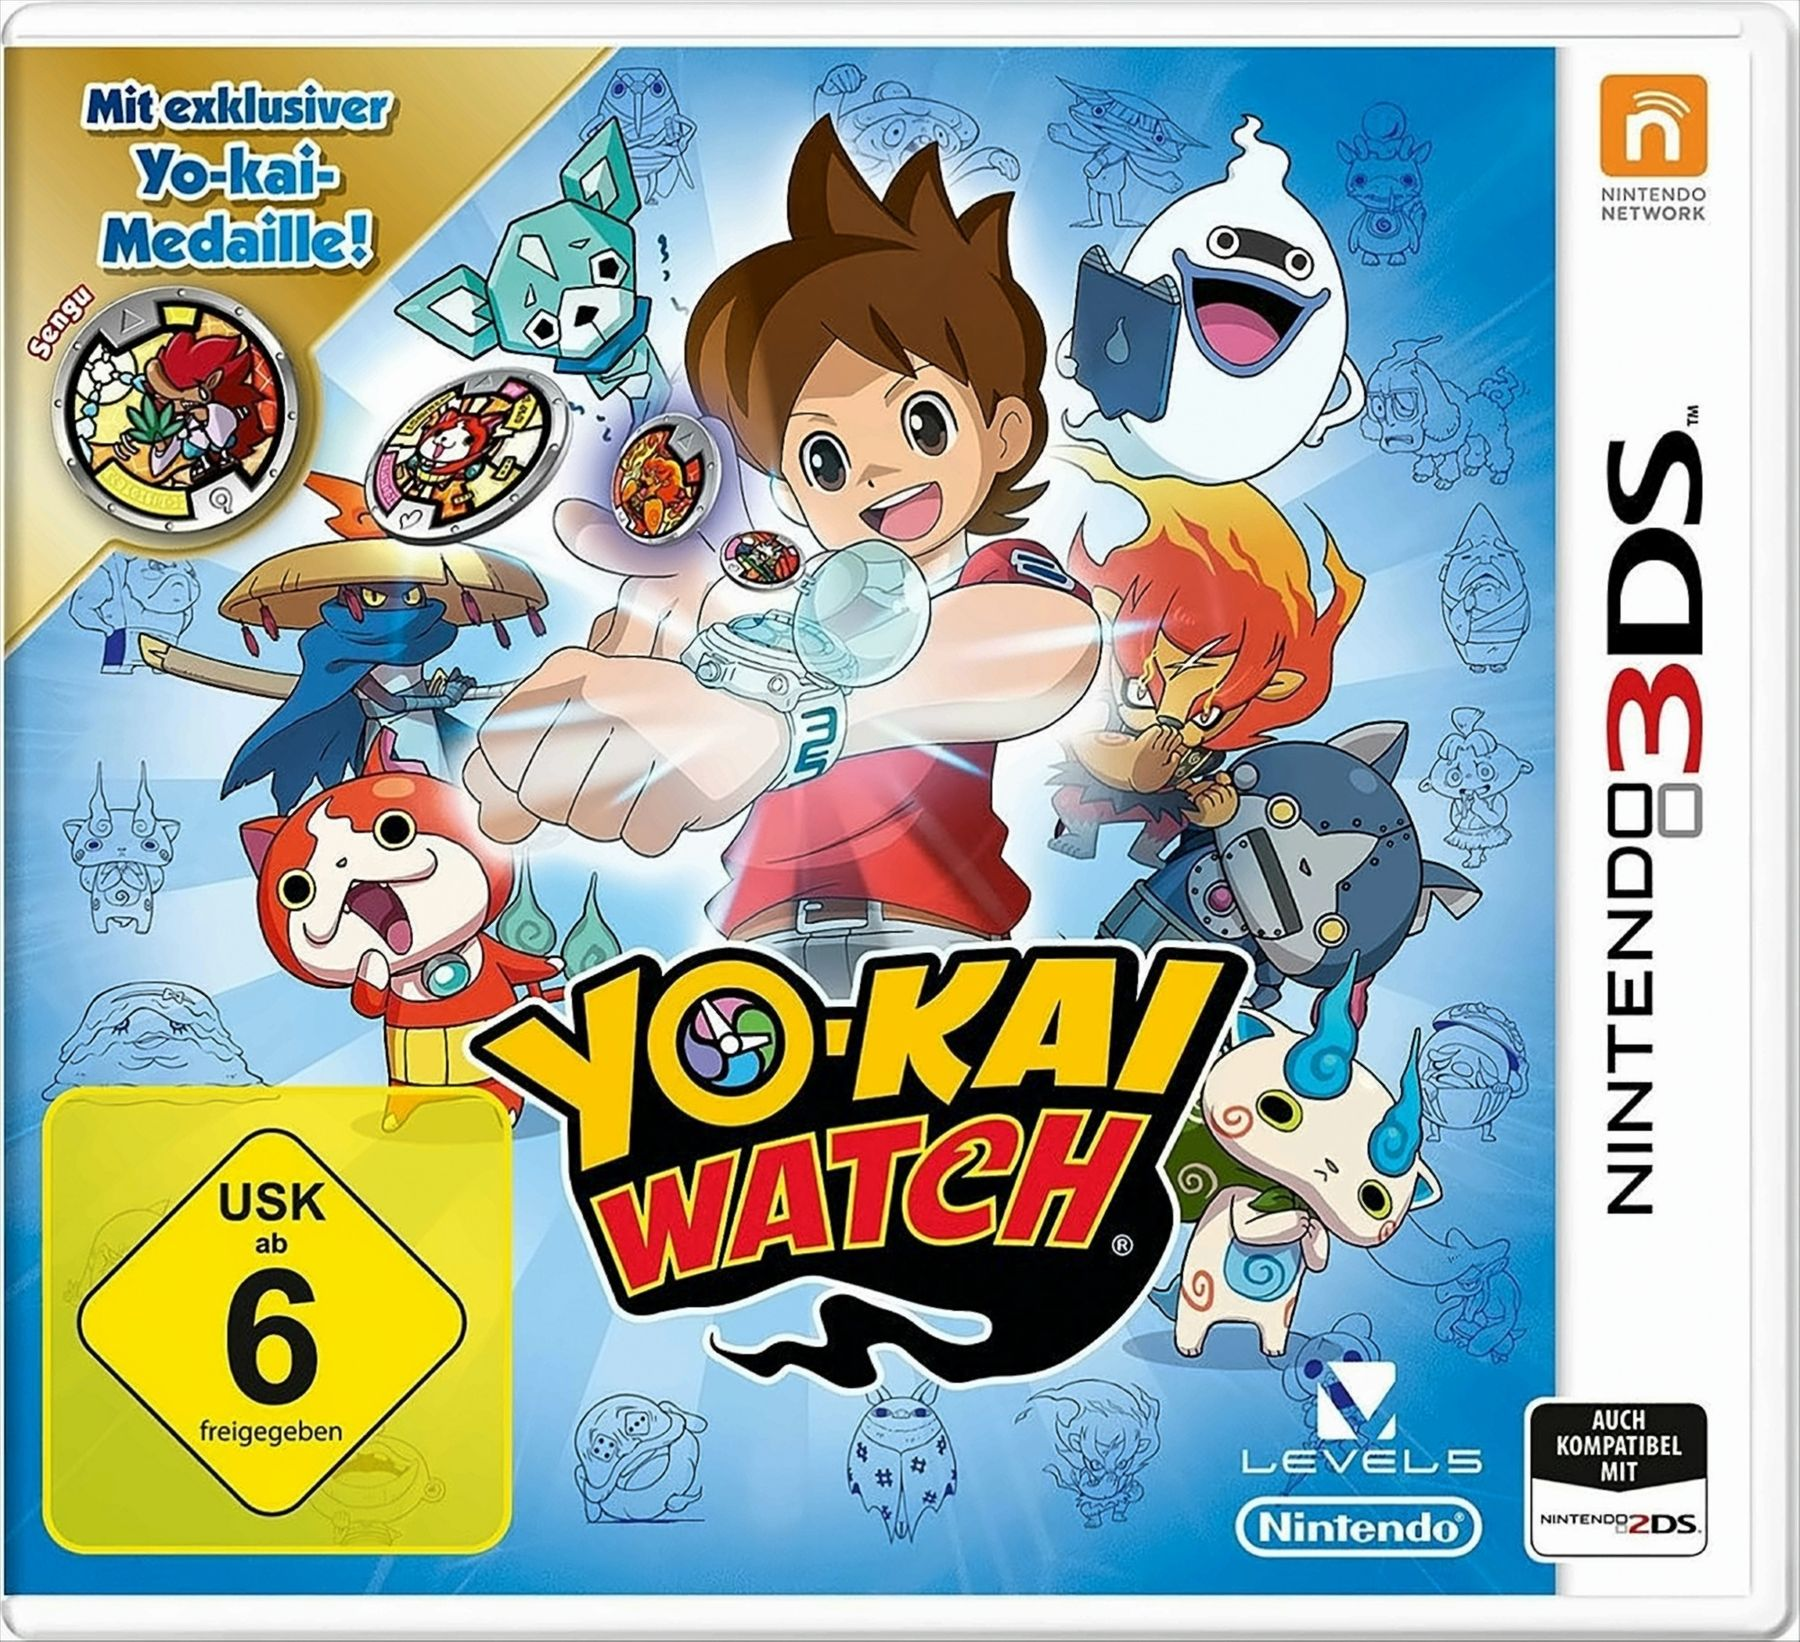 Medaille Special 3DS] - [Nintendo inkl. Yo-Kai Watch Edition